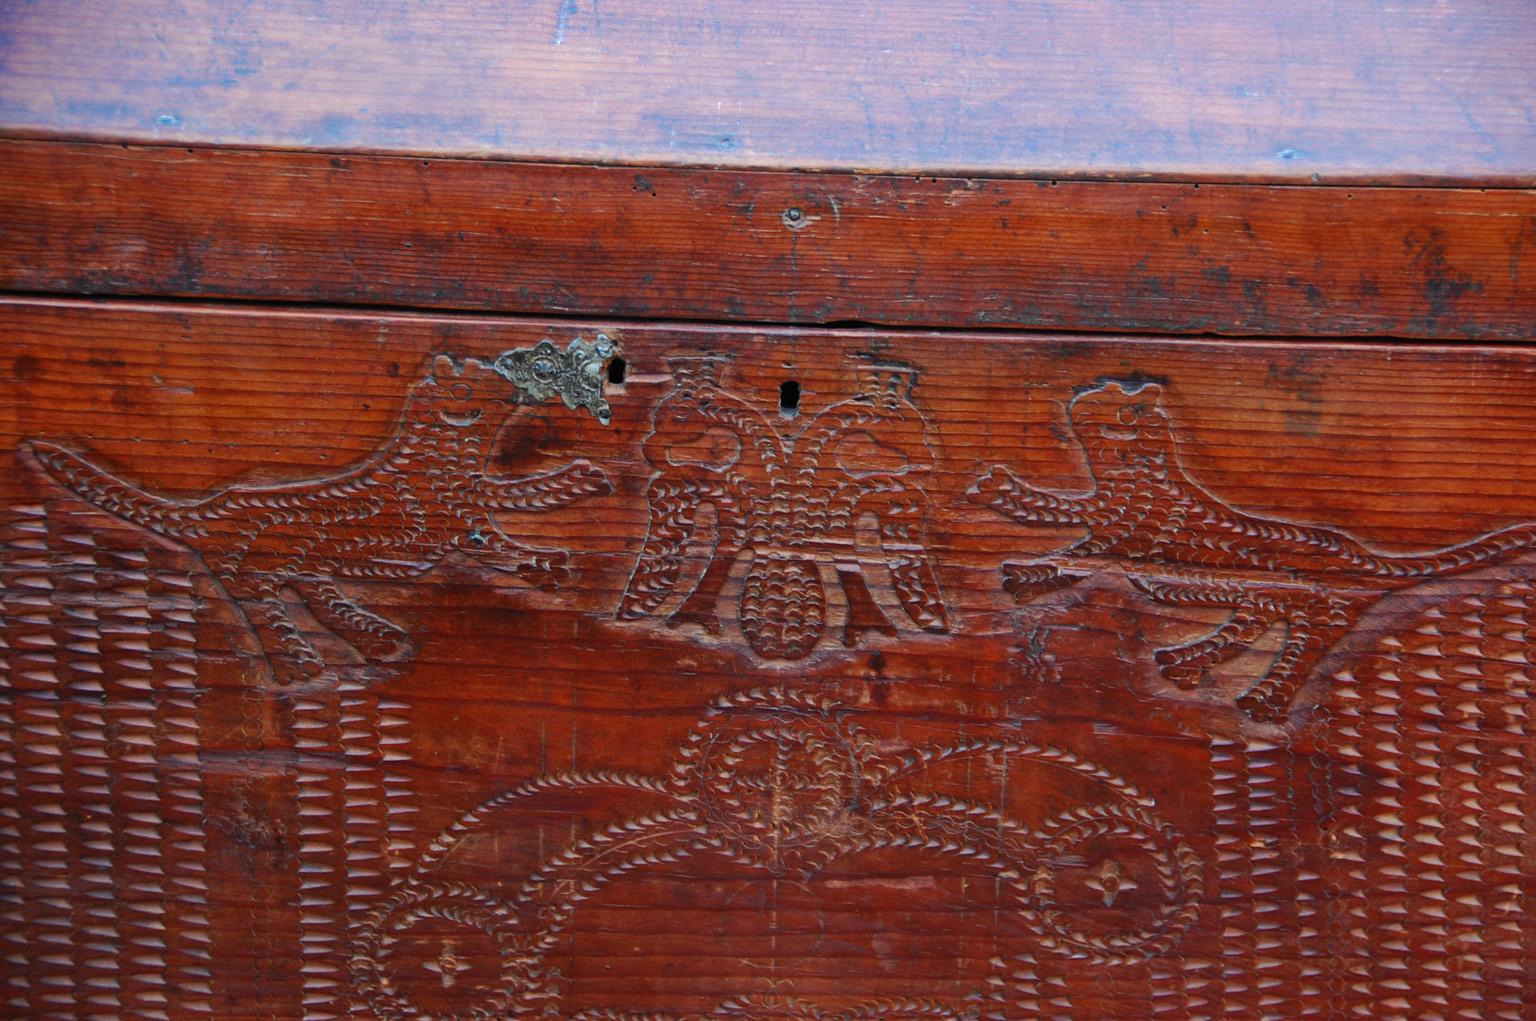 Folk Art Mixteca 19th Century Wedding Chest Jaguar and Crowned Eagle Carvings Arched Top